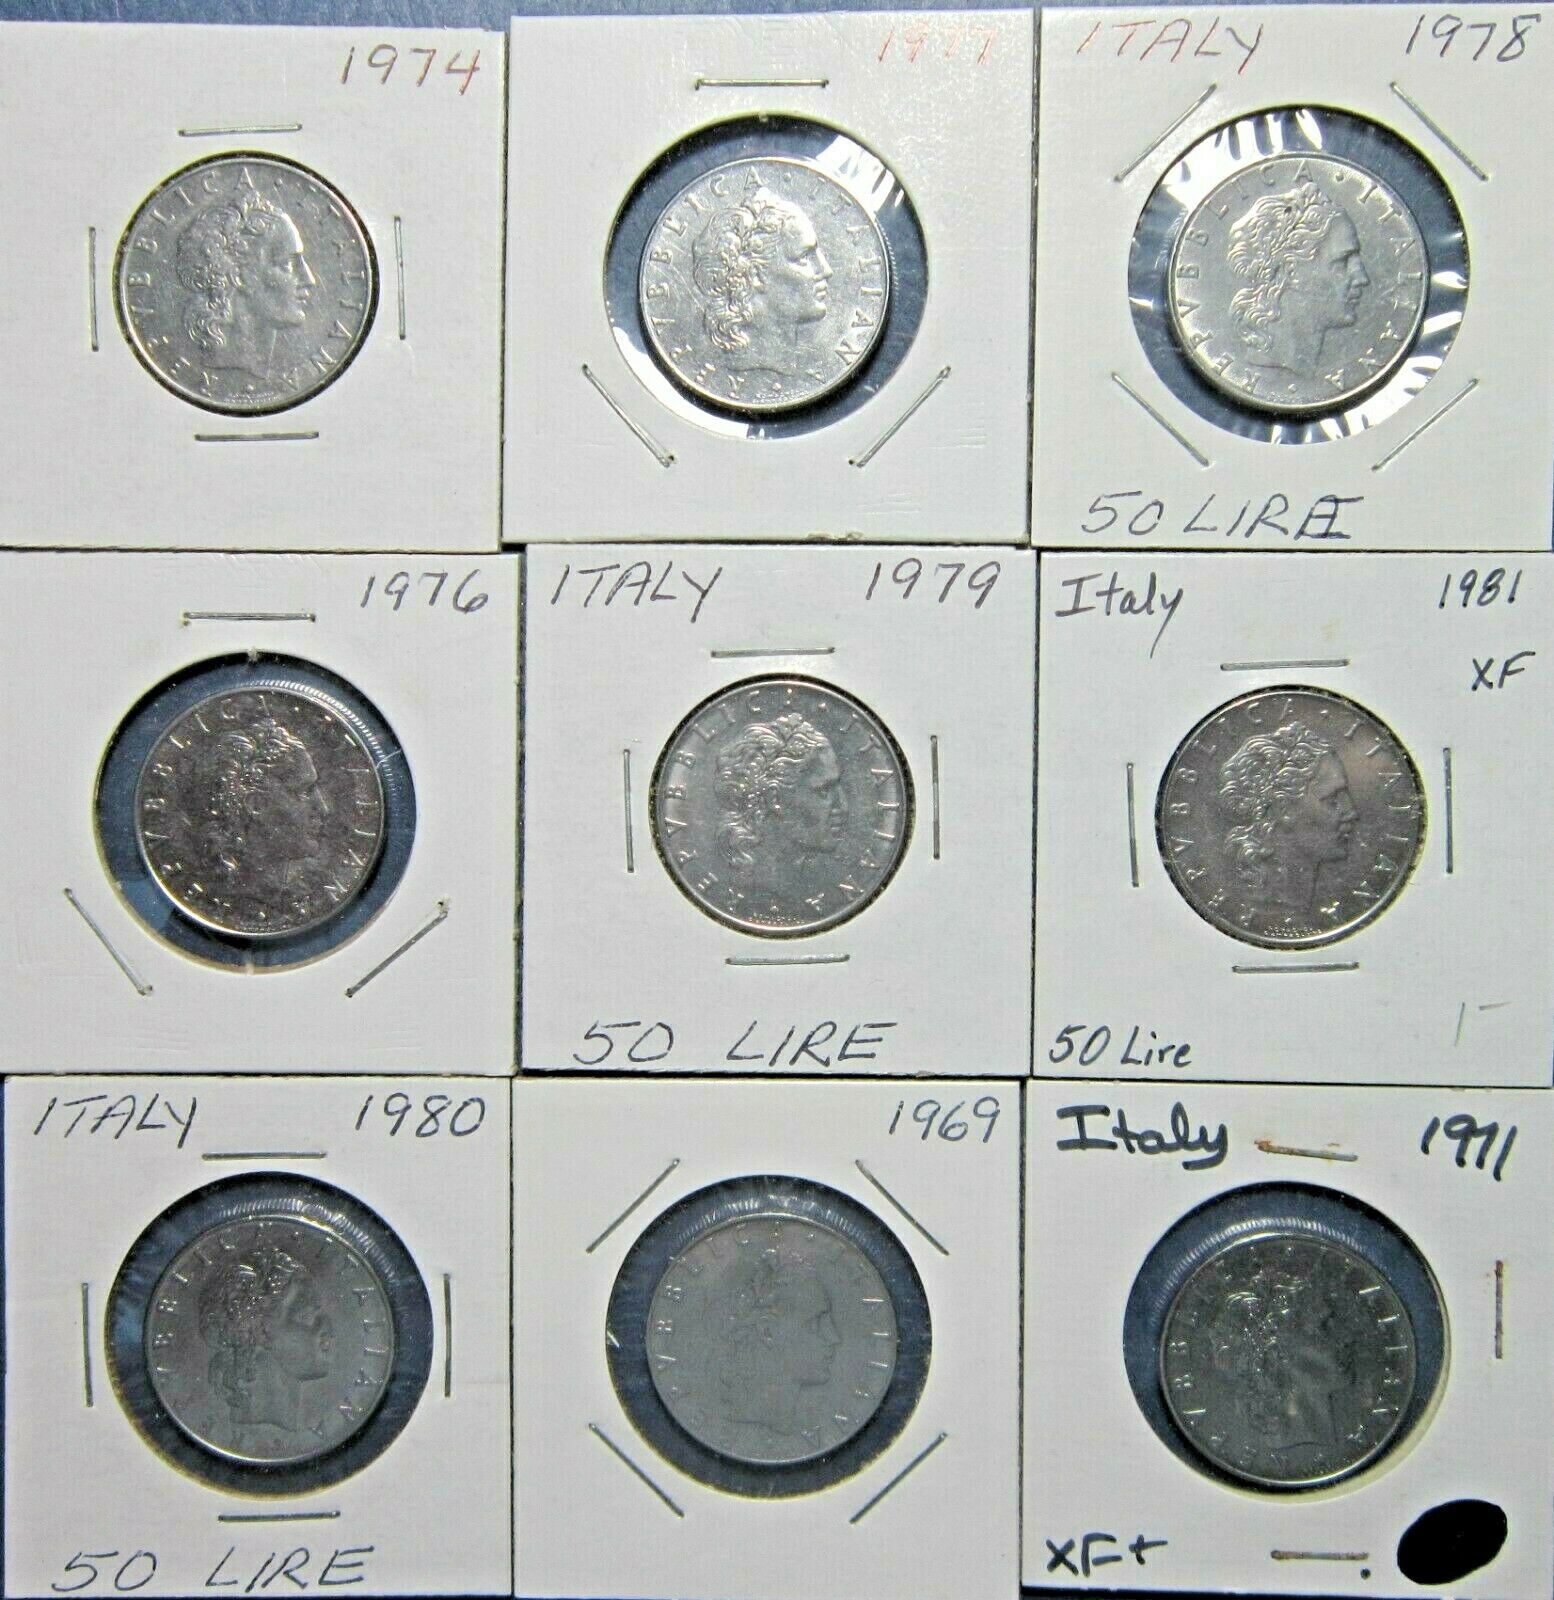 ITALY. HIGH GRADE ASSORTED LOT OF 9 COINS. 50 LIRE COINS. 1969-1981. SEE PICS